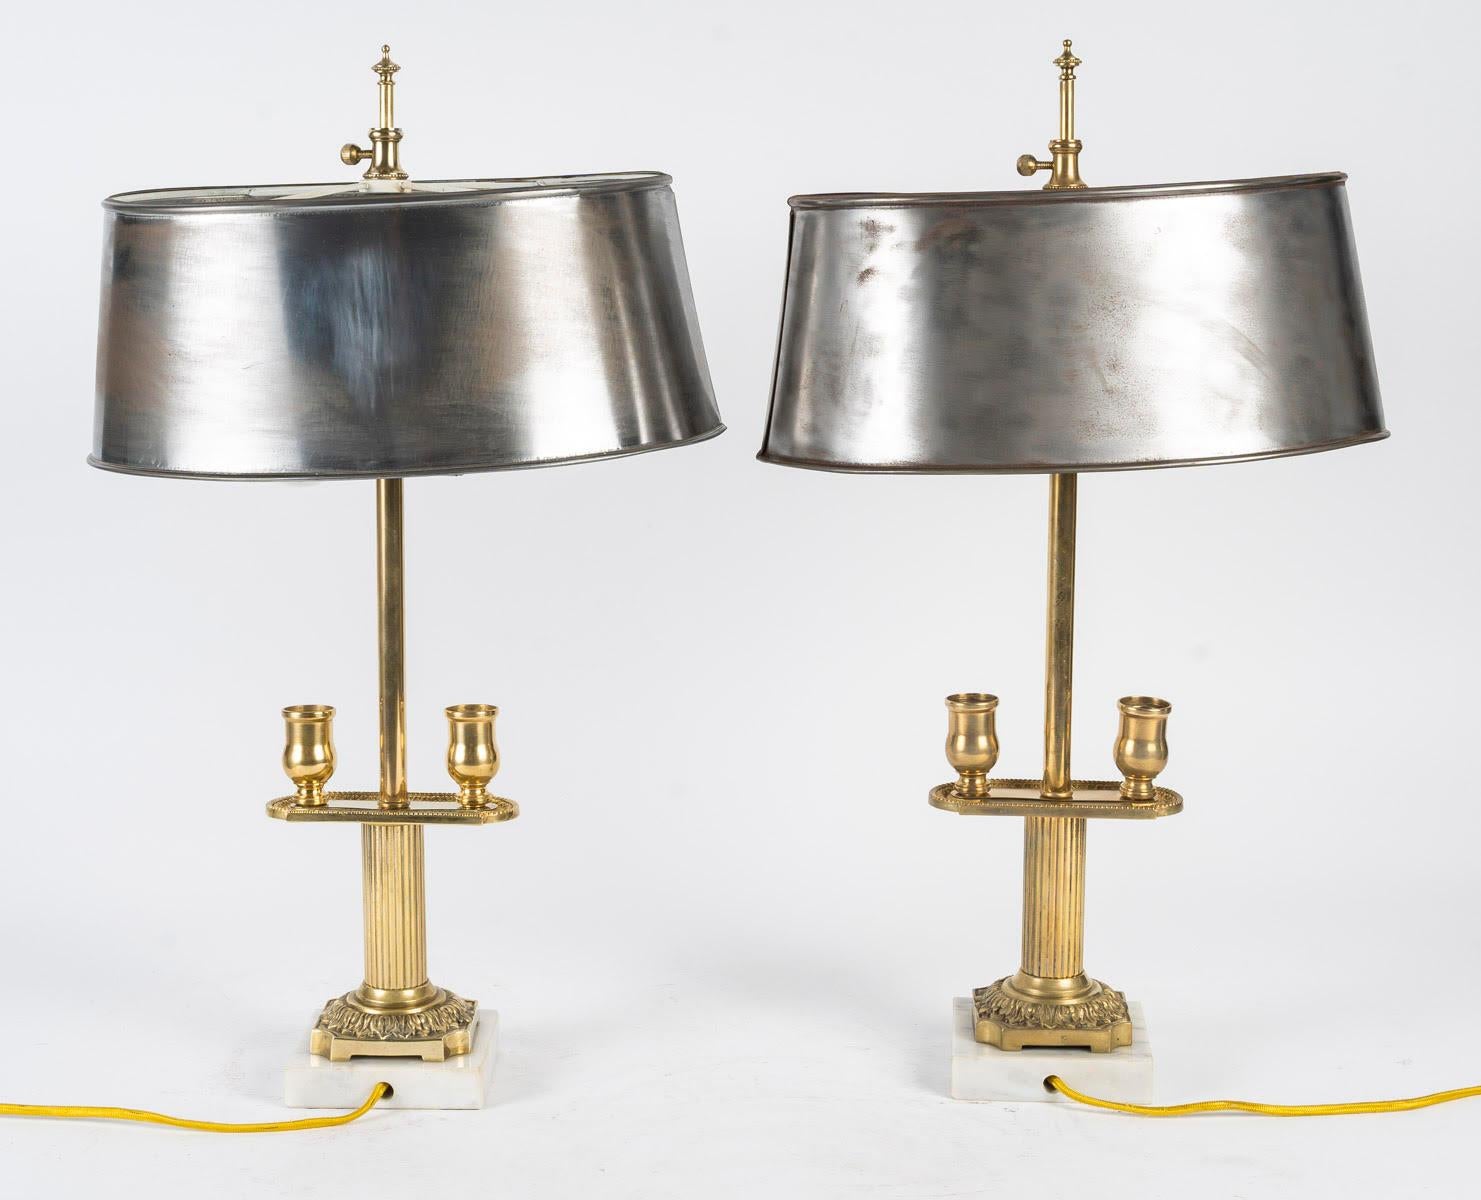 Bronze Pair of Candlesticks Mounted as Table Lamps, 19th Century, Napoleon III Period. For Sale